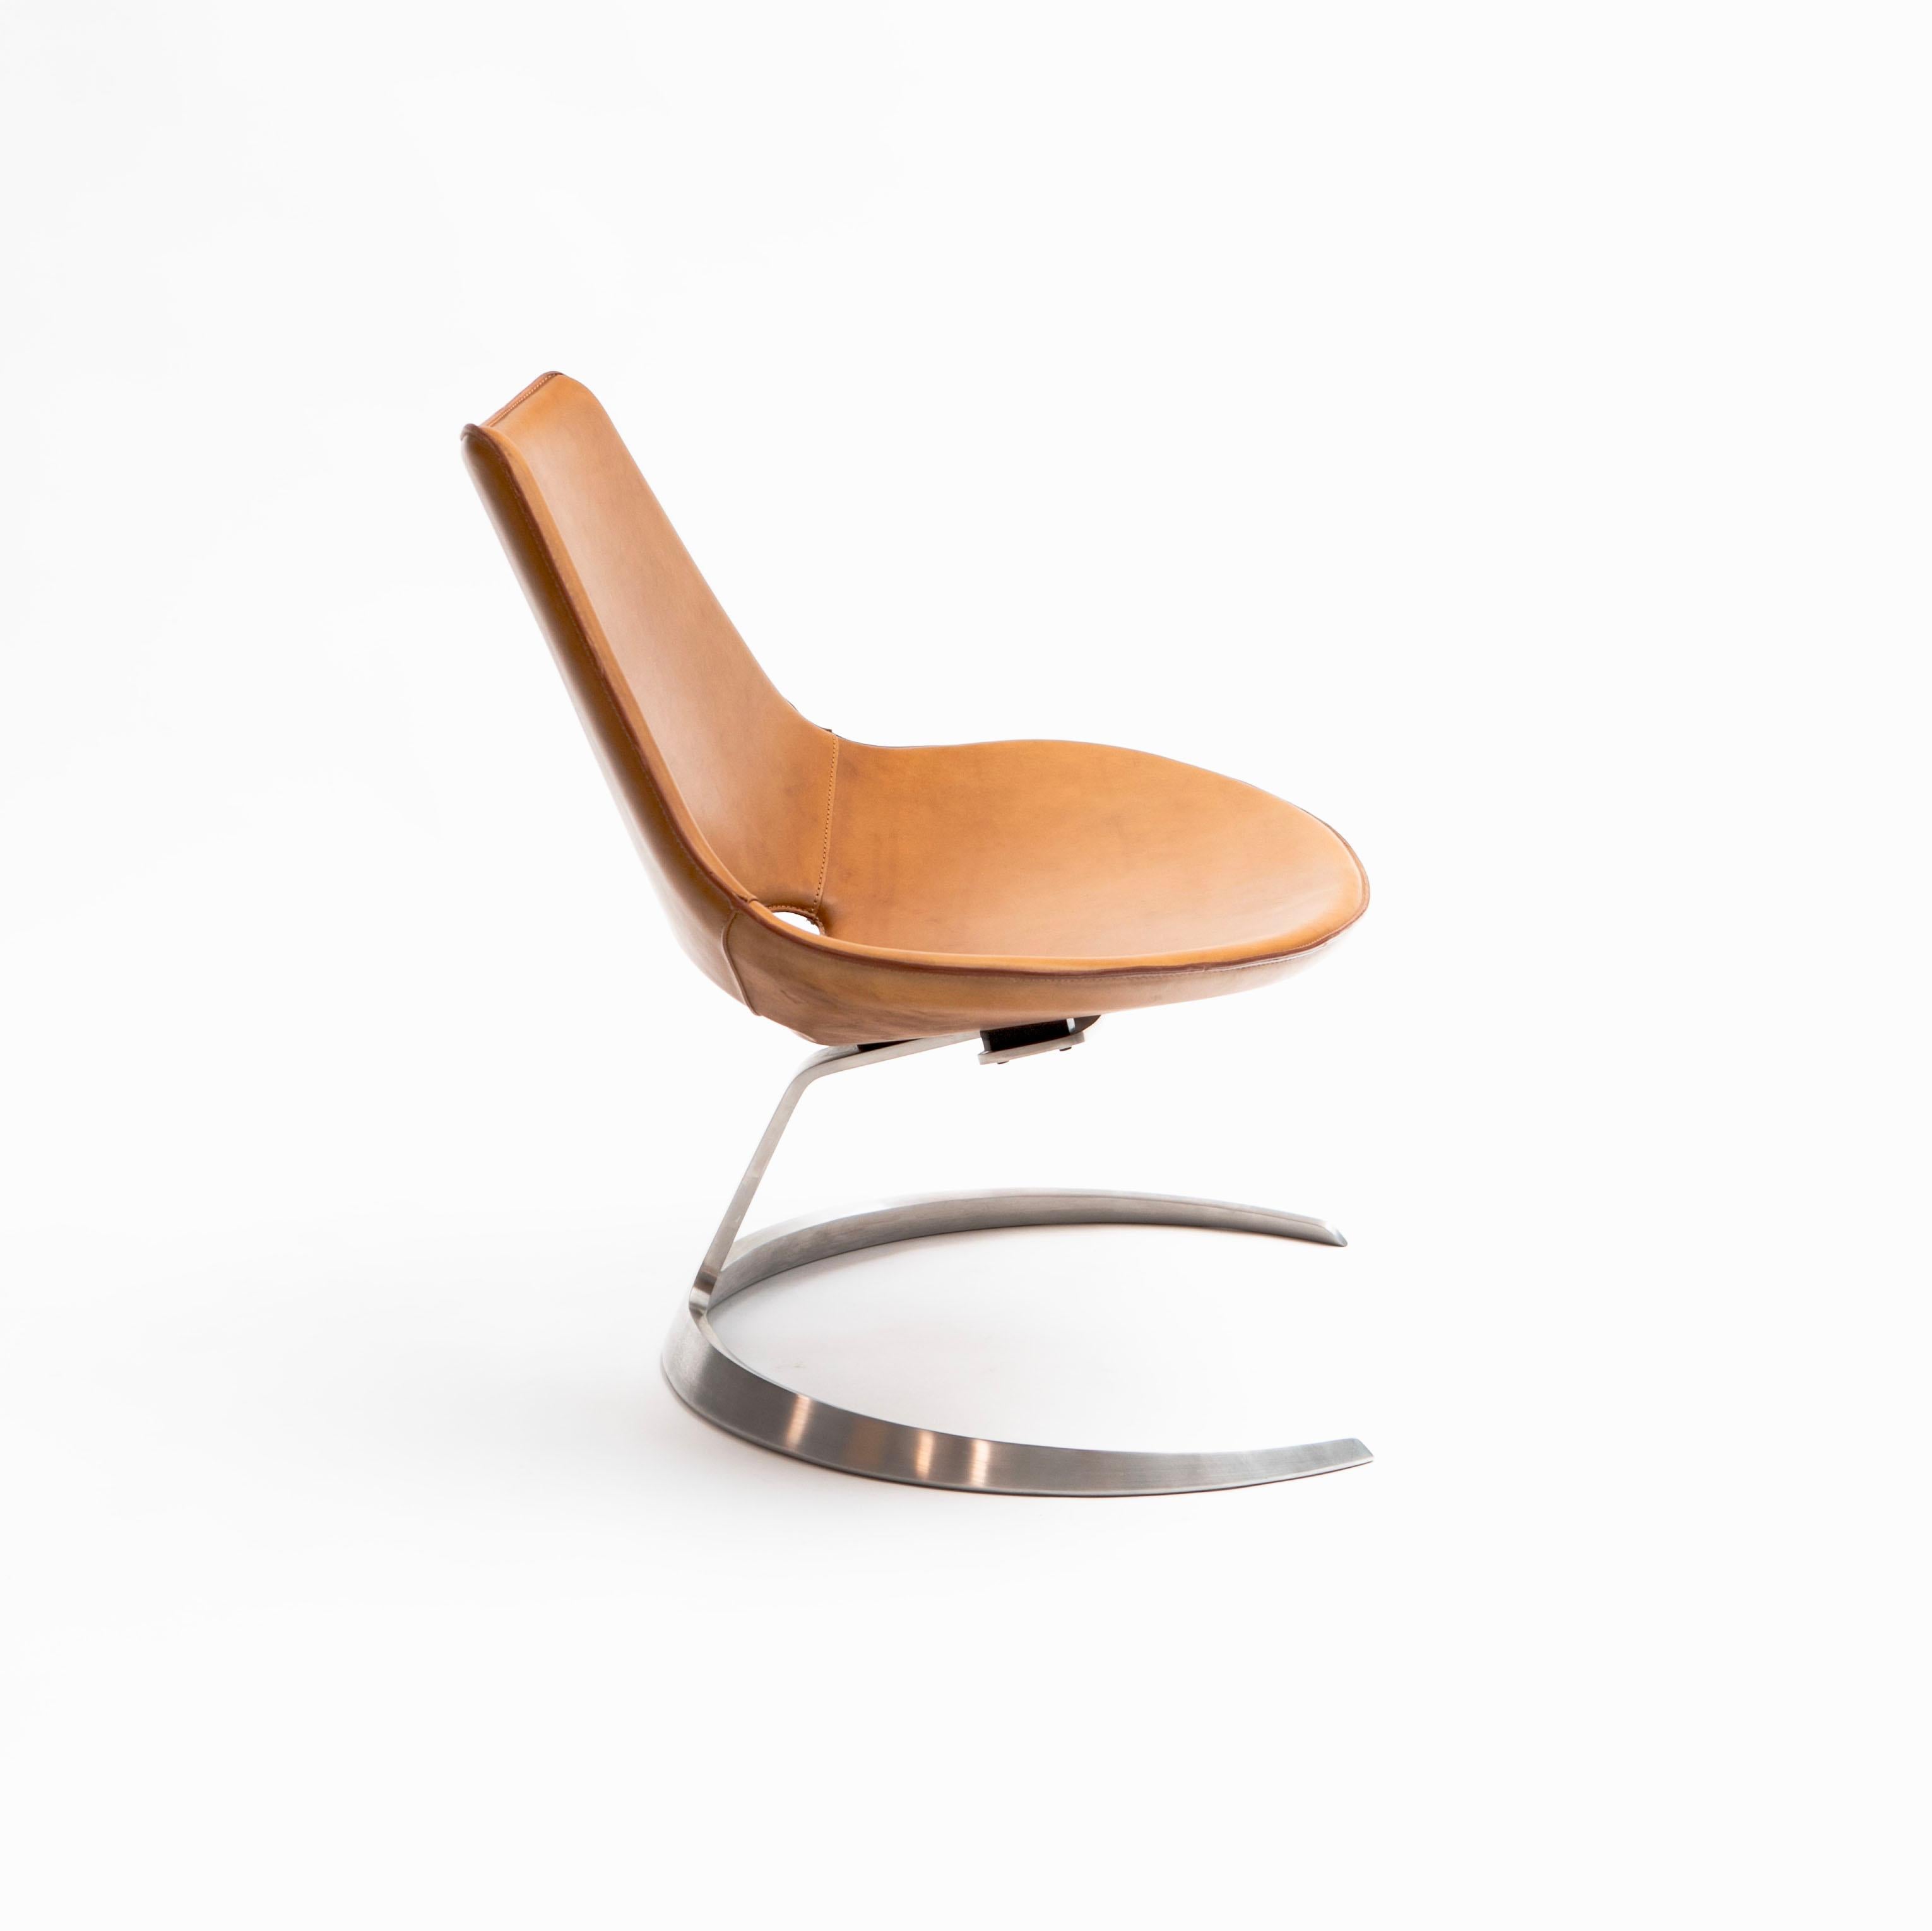 Preben Fabricius og Jørgen Kastholm for Ex-Bo.
Lounge chair with stainless steel frame and original cognac leather upholstery.
Designed in 1962, made by bo-Ex in the 1980's. This chair is number 50.
The Bo-Ex maker mark and is etched to the